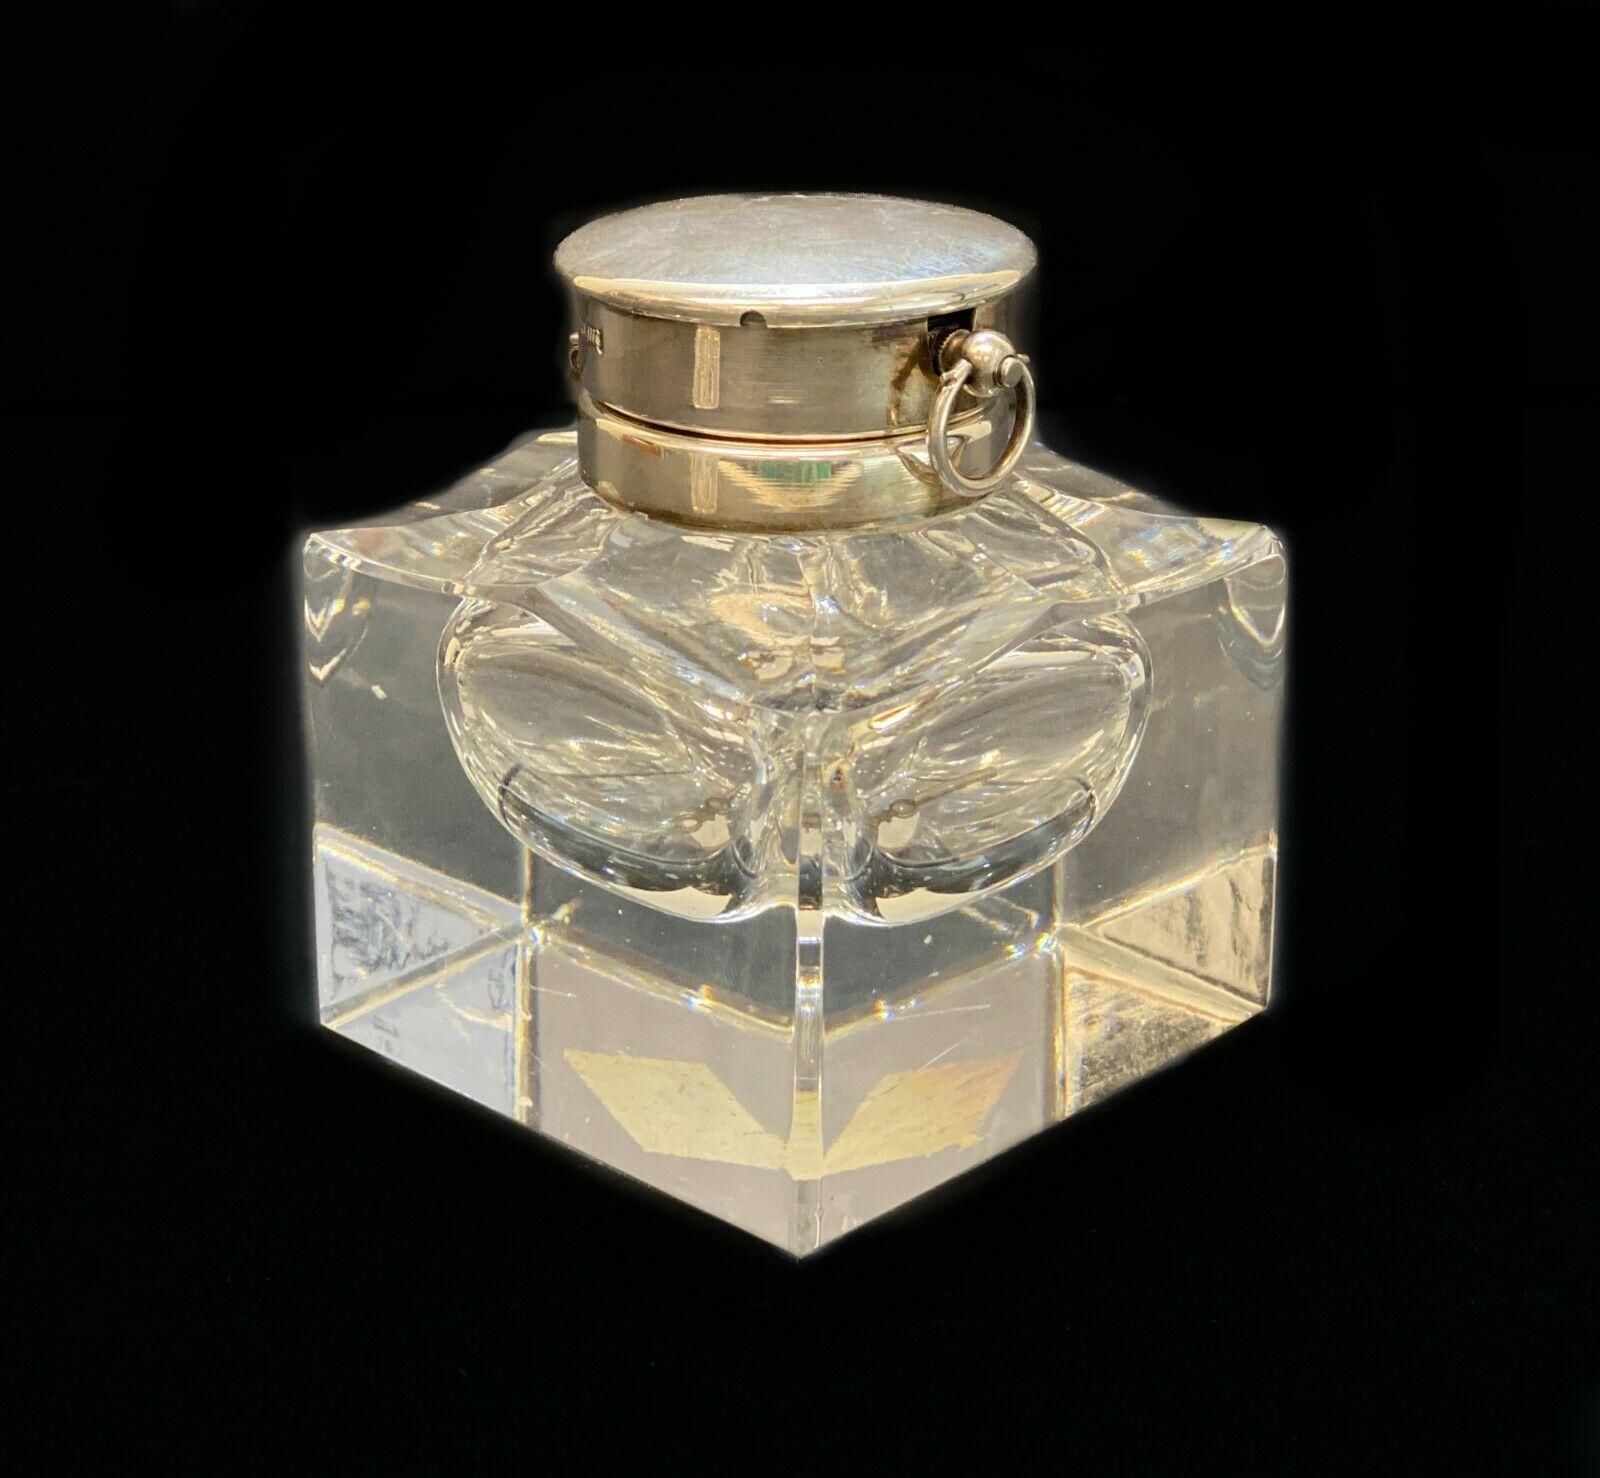 935 Sterling silver modernist cut glass pocket-watch mounted inkwell. H Samuel Swiss pocket watch mounted to the lid. Marked 935 Sterling to the side. 

Additional information:
Featured refinements: glass inkwell 
Material: sterling